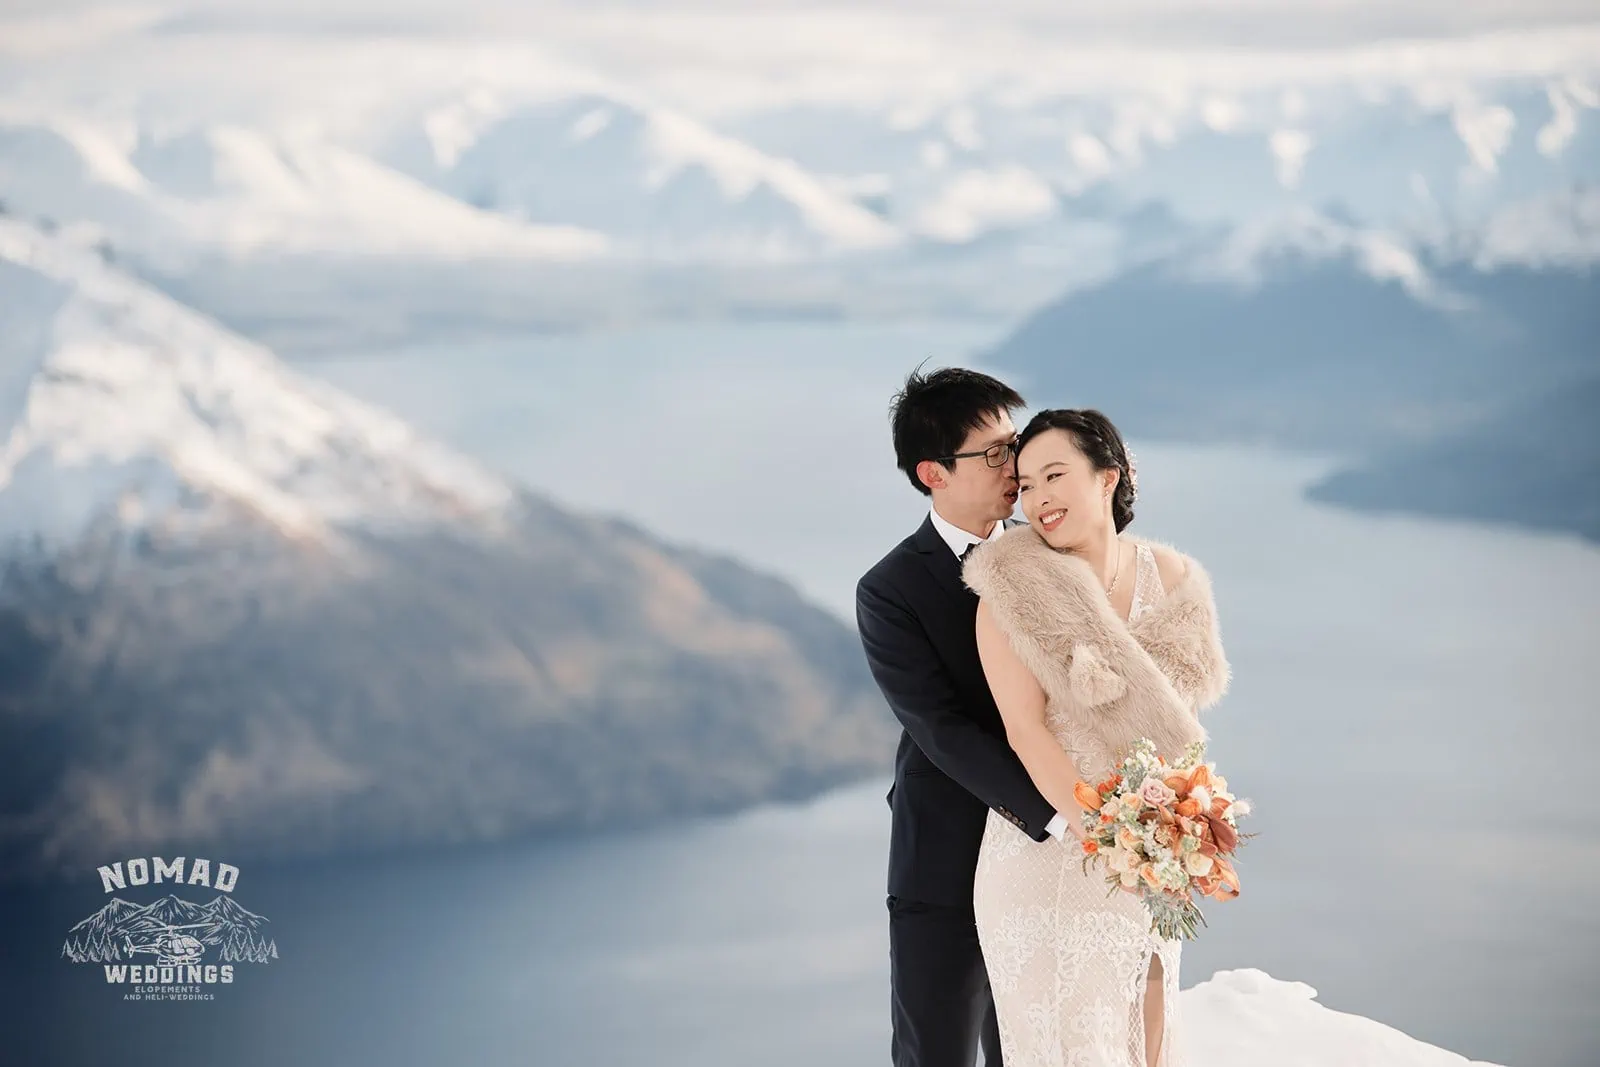 Joanna and Tony, the bride and groom, standing on top of a mountain in Queenstown, New Zealand.